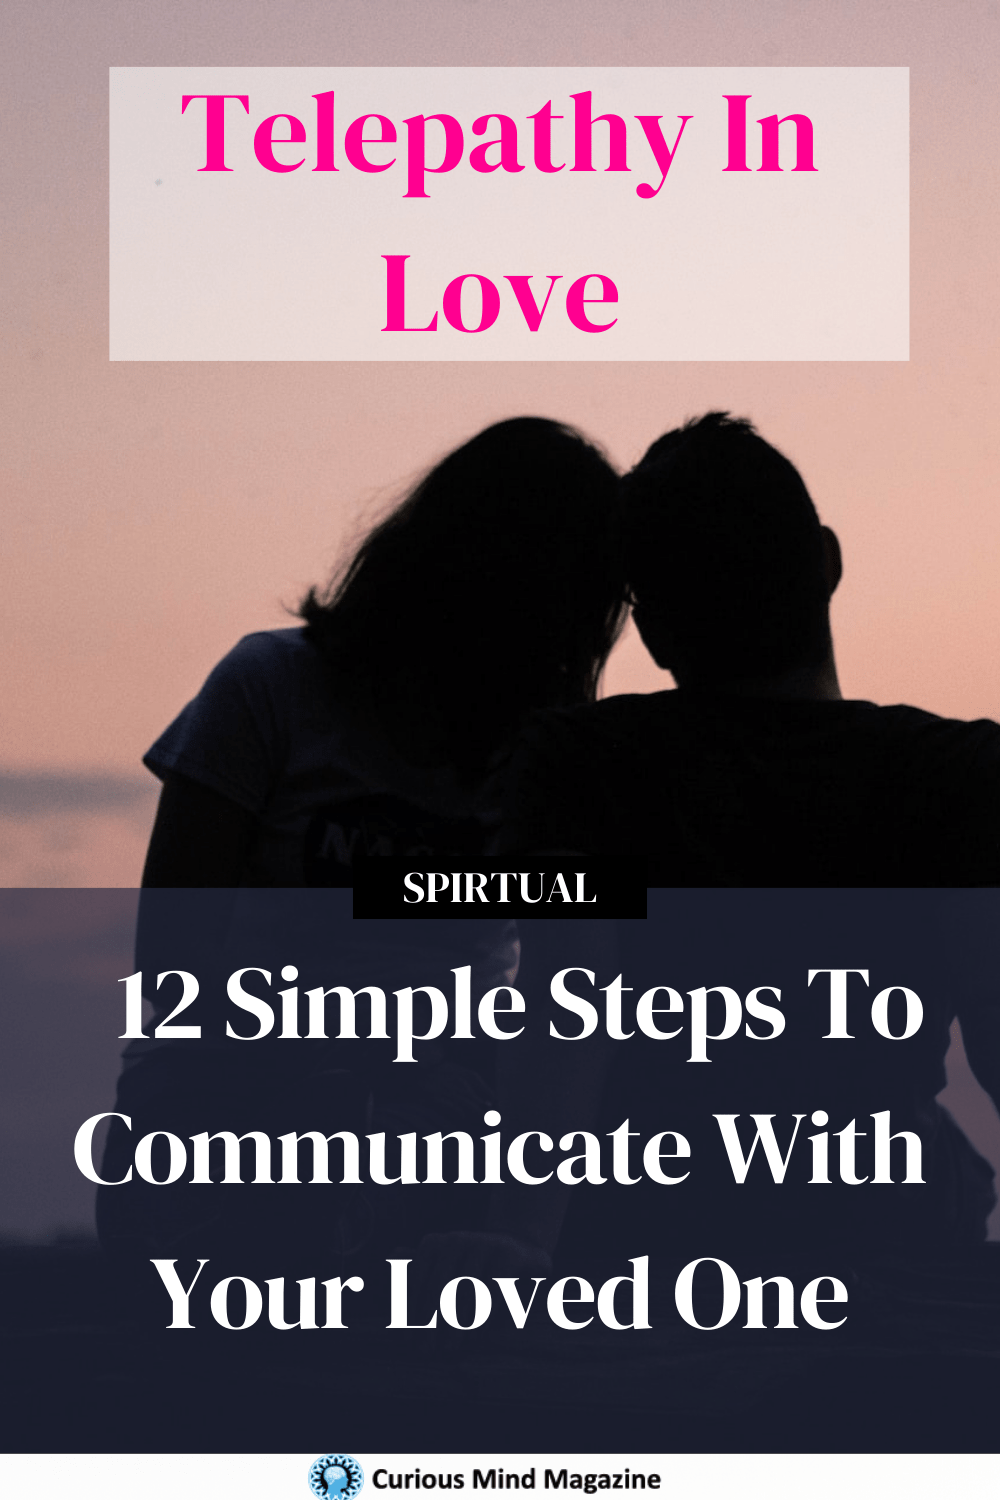 Telepathy In Love - 12 Simple Steps To Communicate With Your Loved One